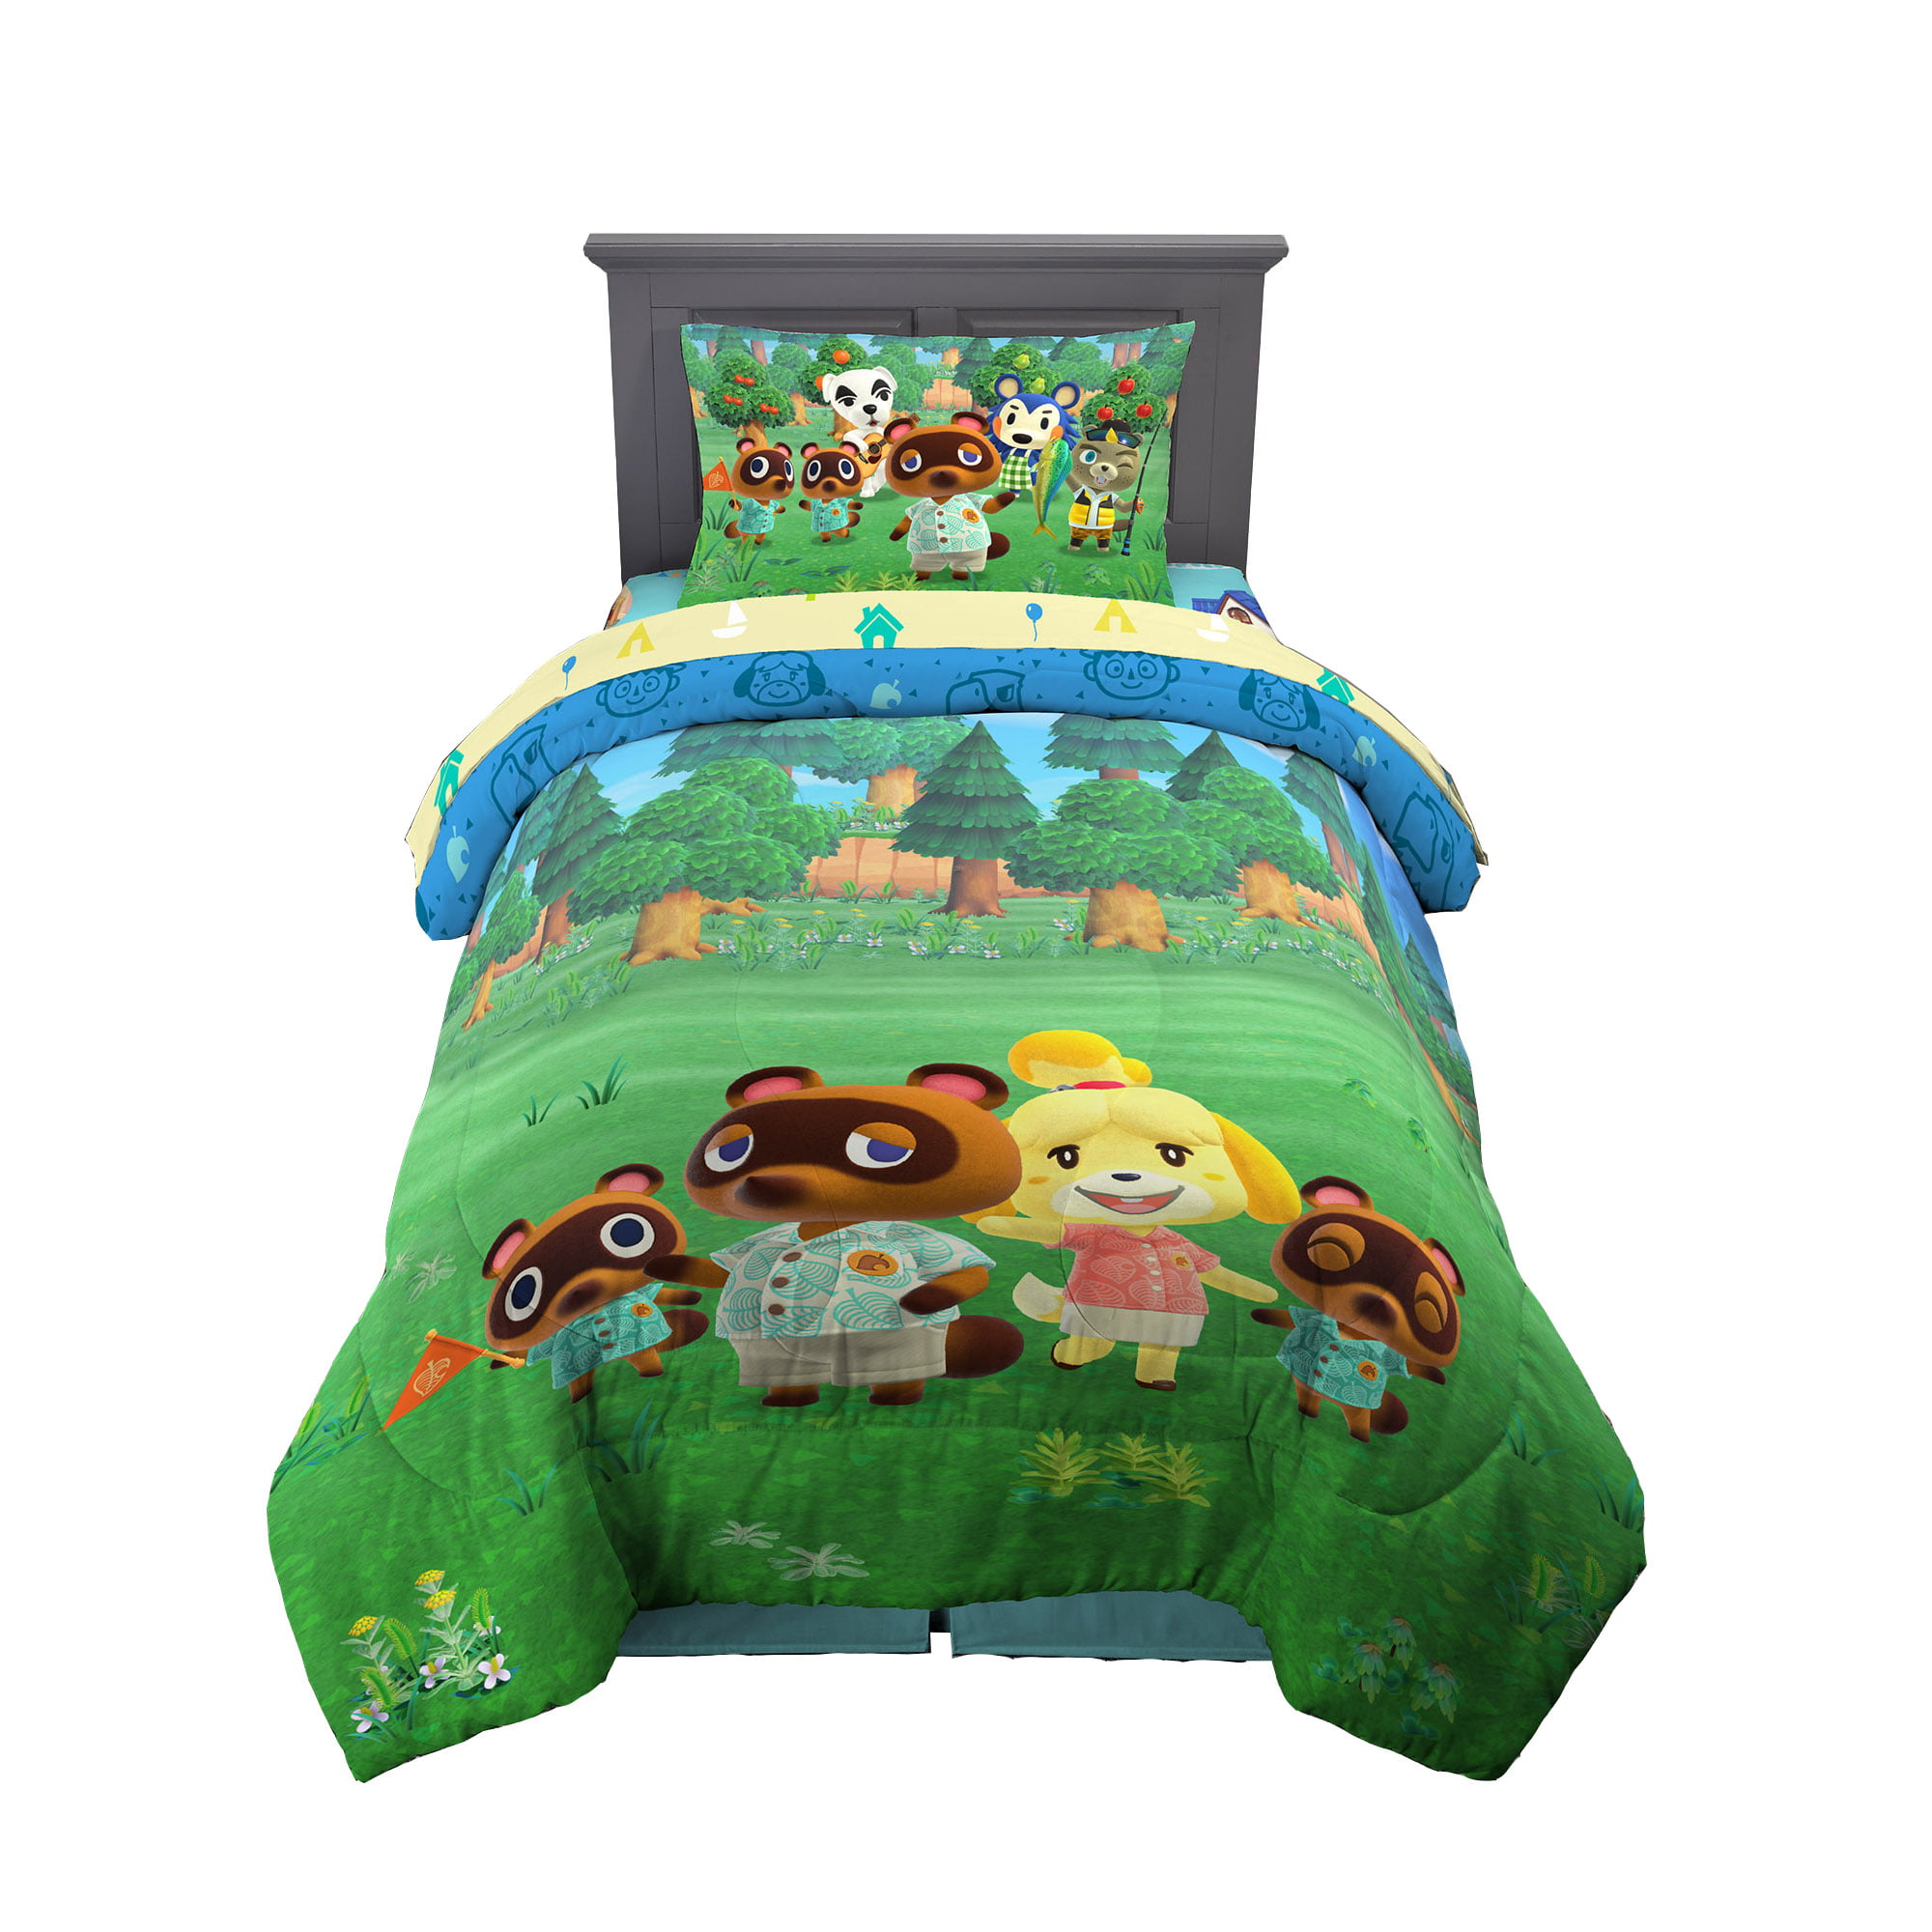 Details about   New Animal Crossing 2 pc Twin/Full Reversible Comforter & Pillow Sham Set 